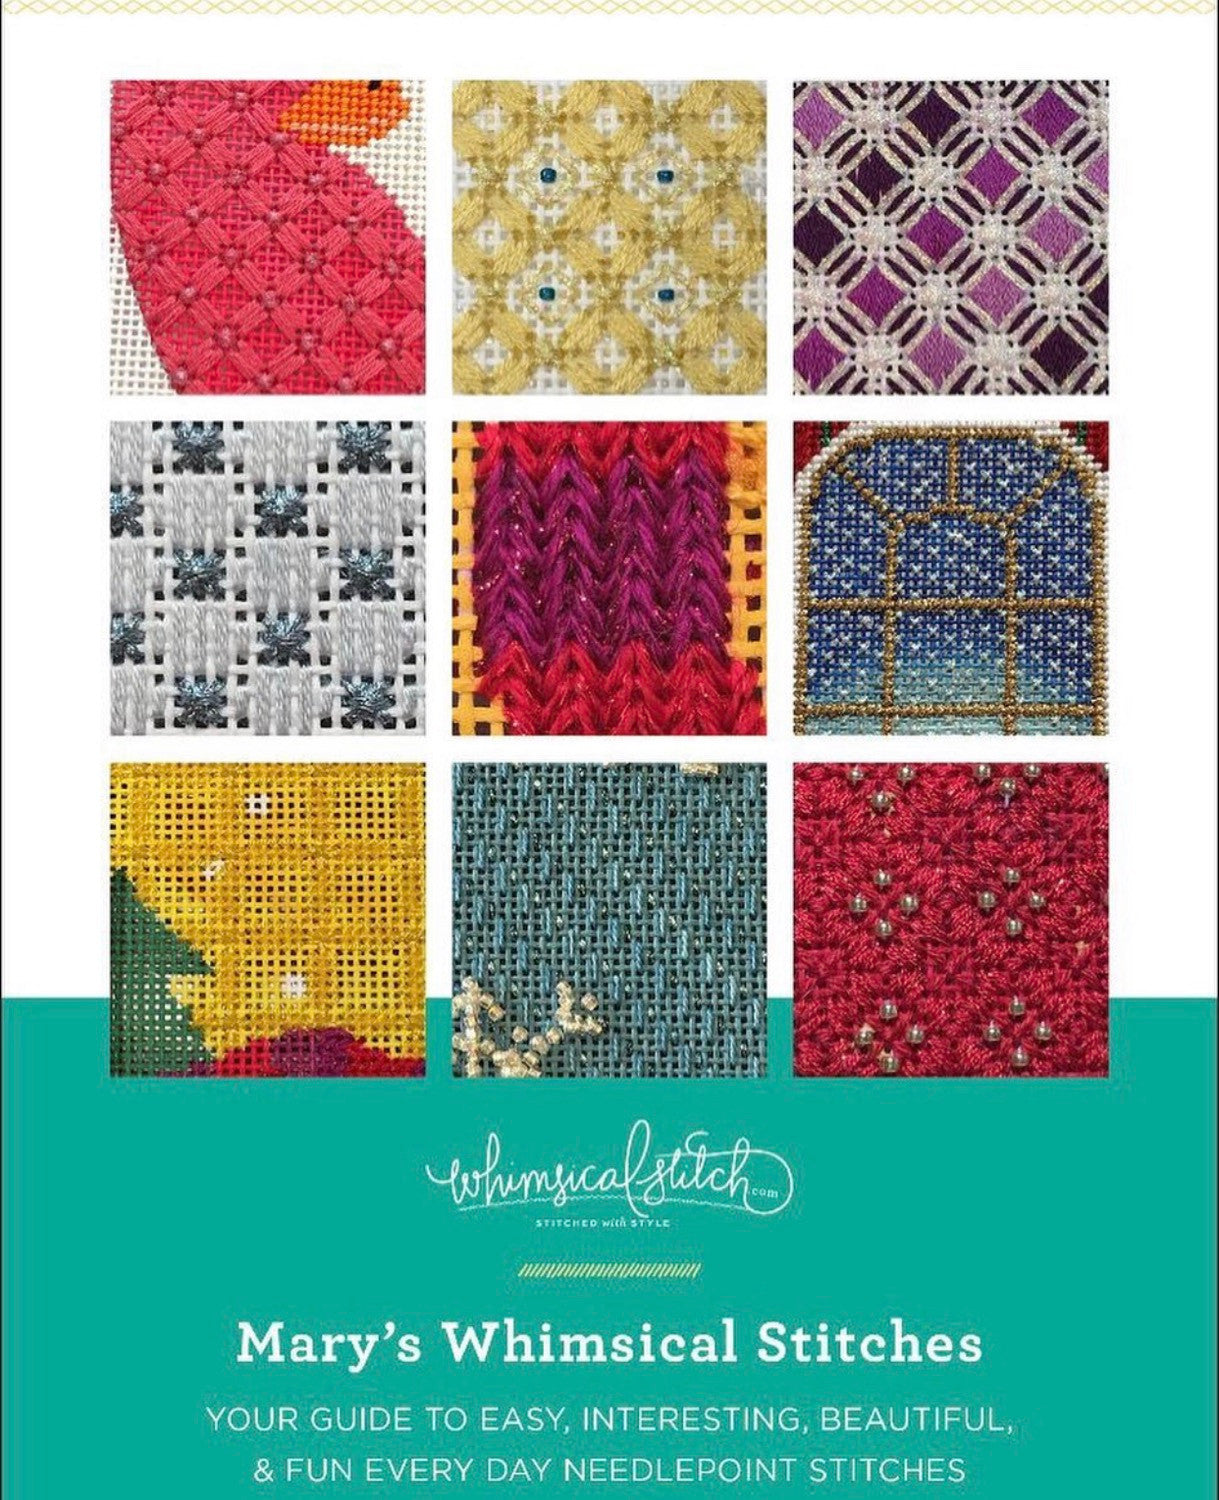 Mary’s Whimsical Stitches vol 2